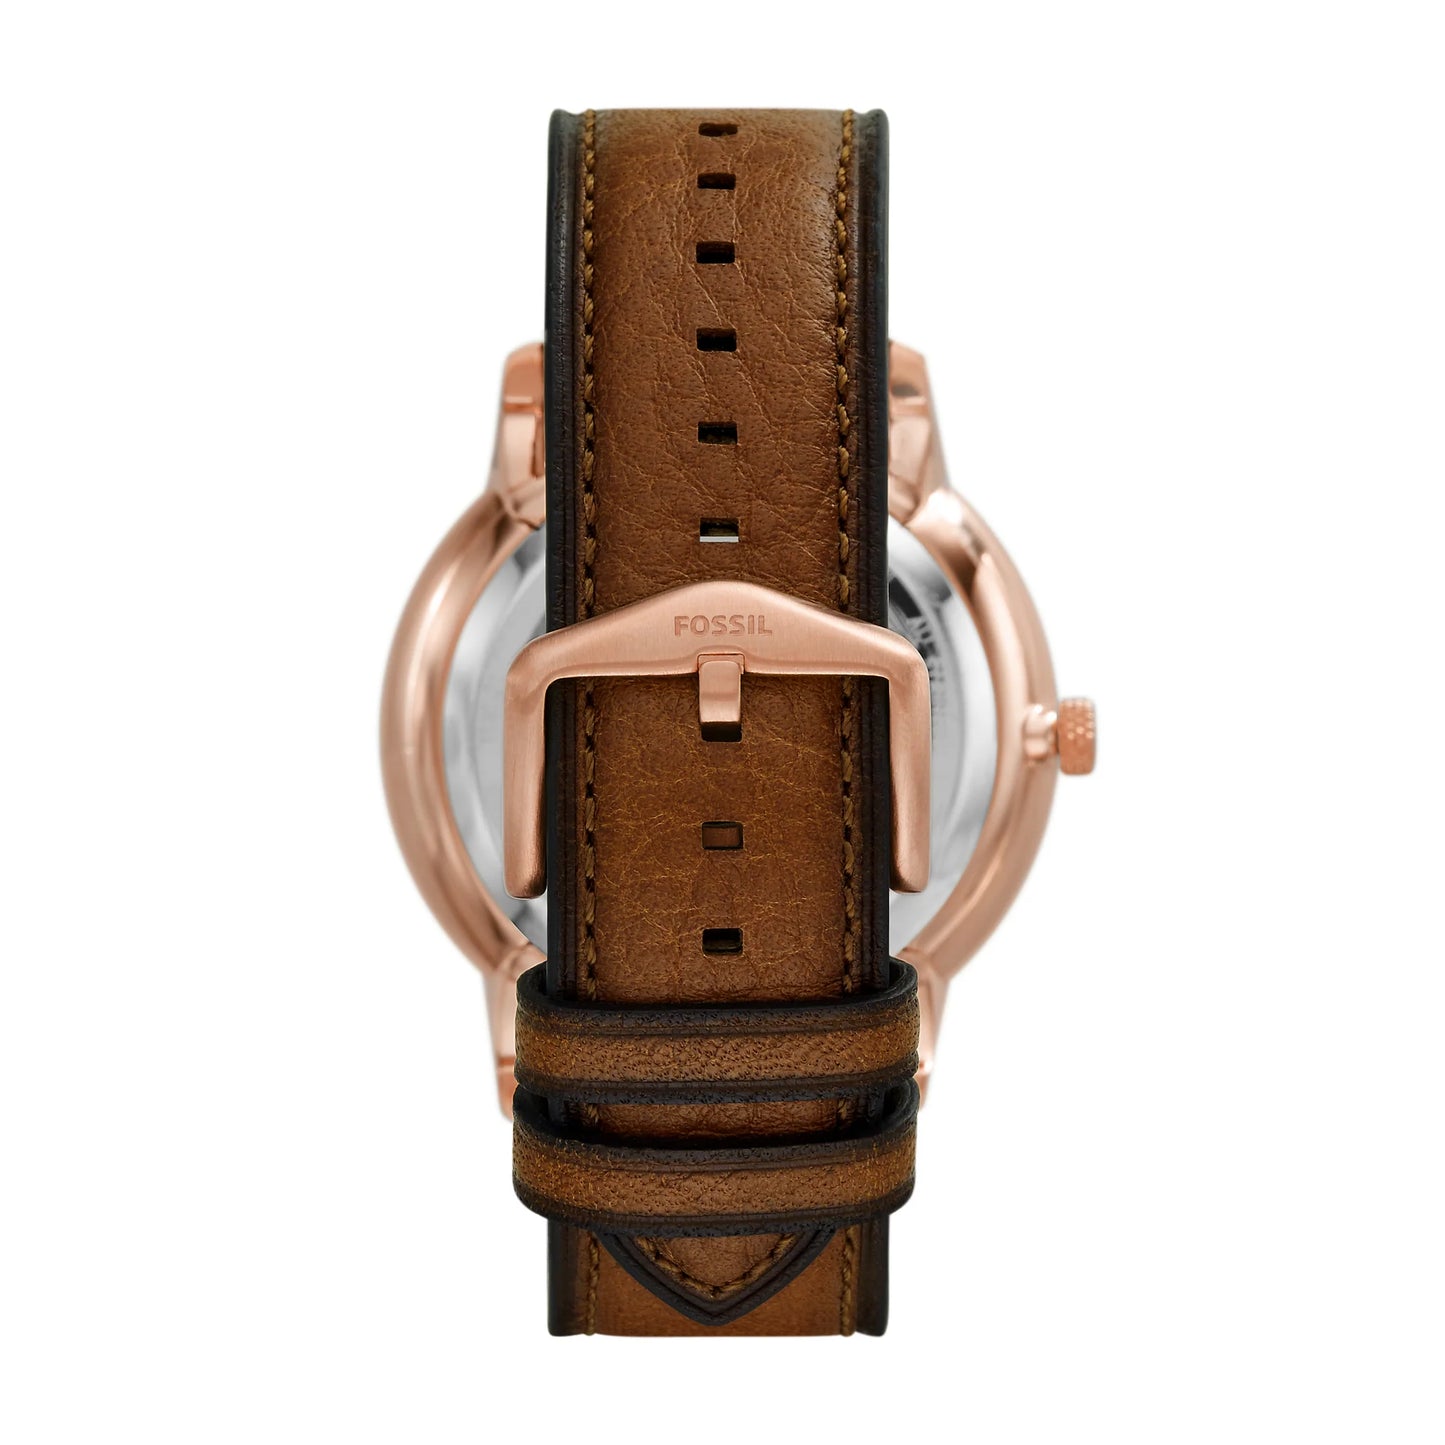 Neutra Automatic Brown Leather Watch